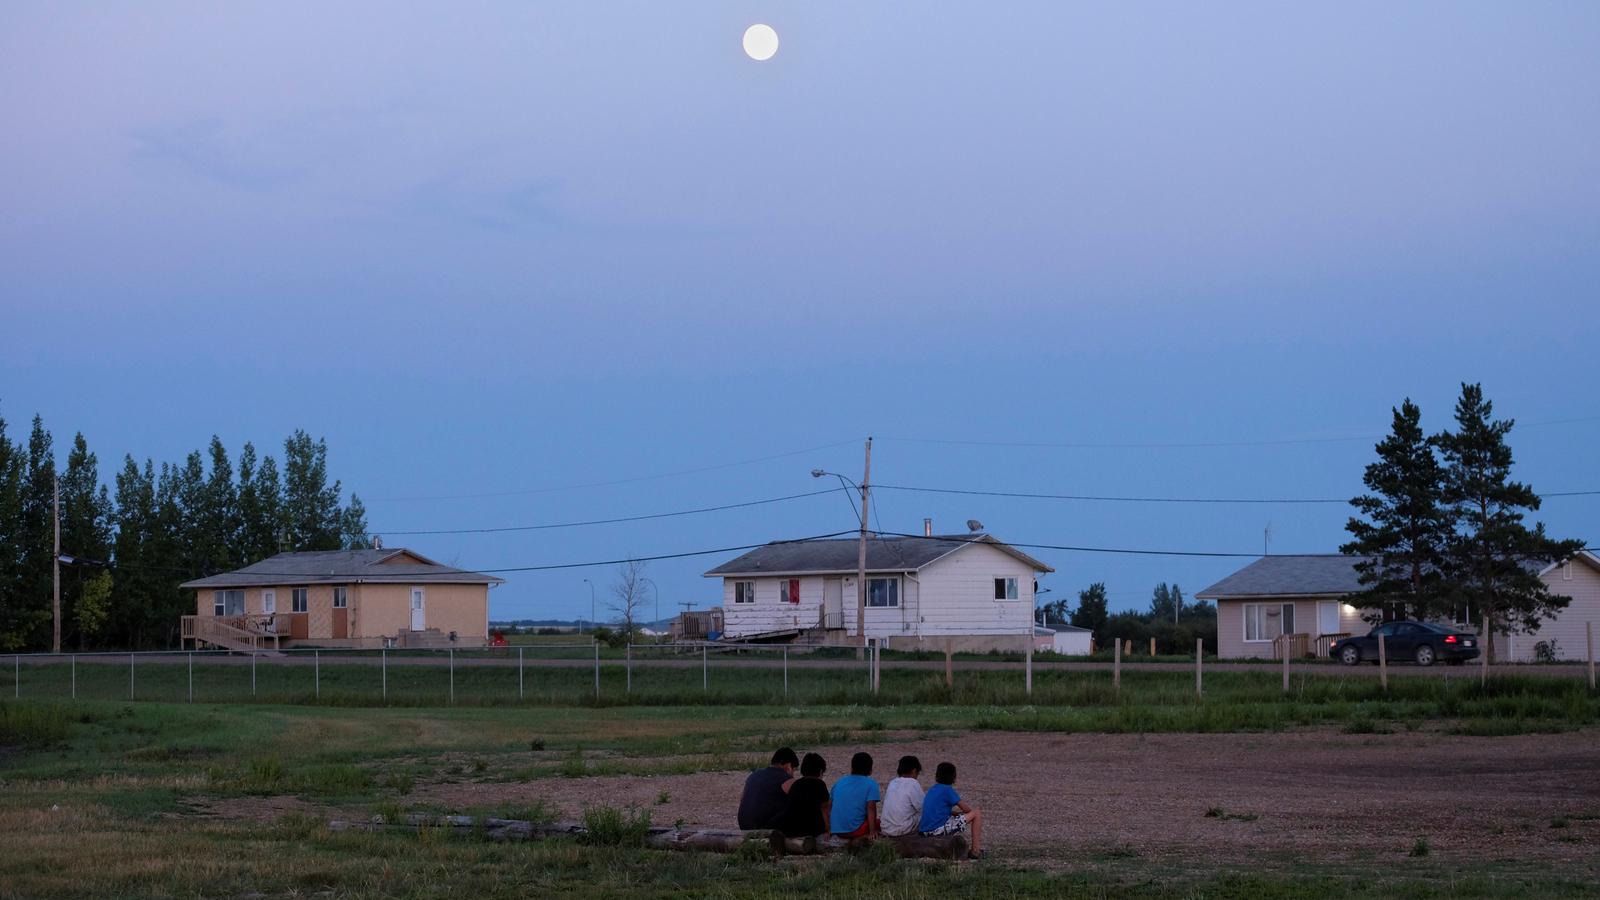 Children sit on a log under the moonlight in a field surrounded by buildings.